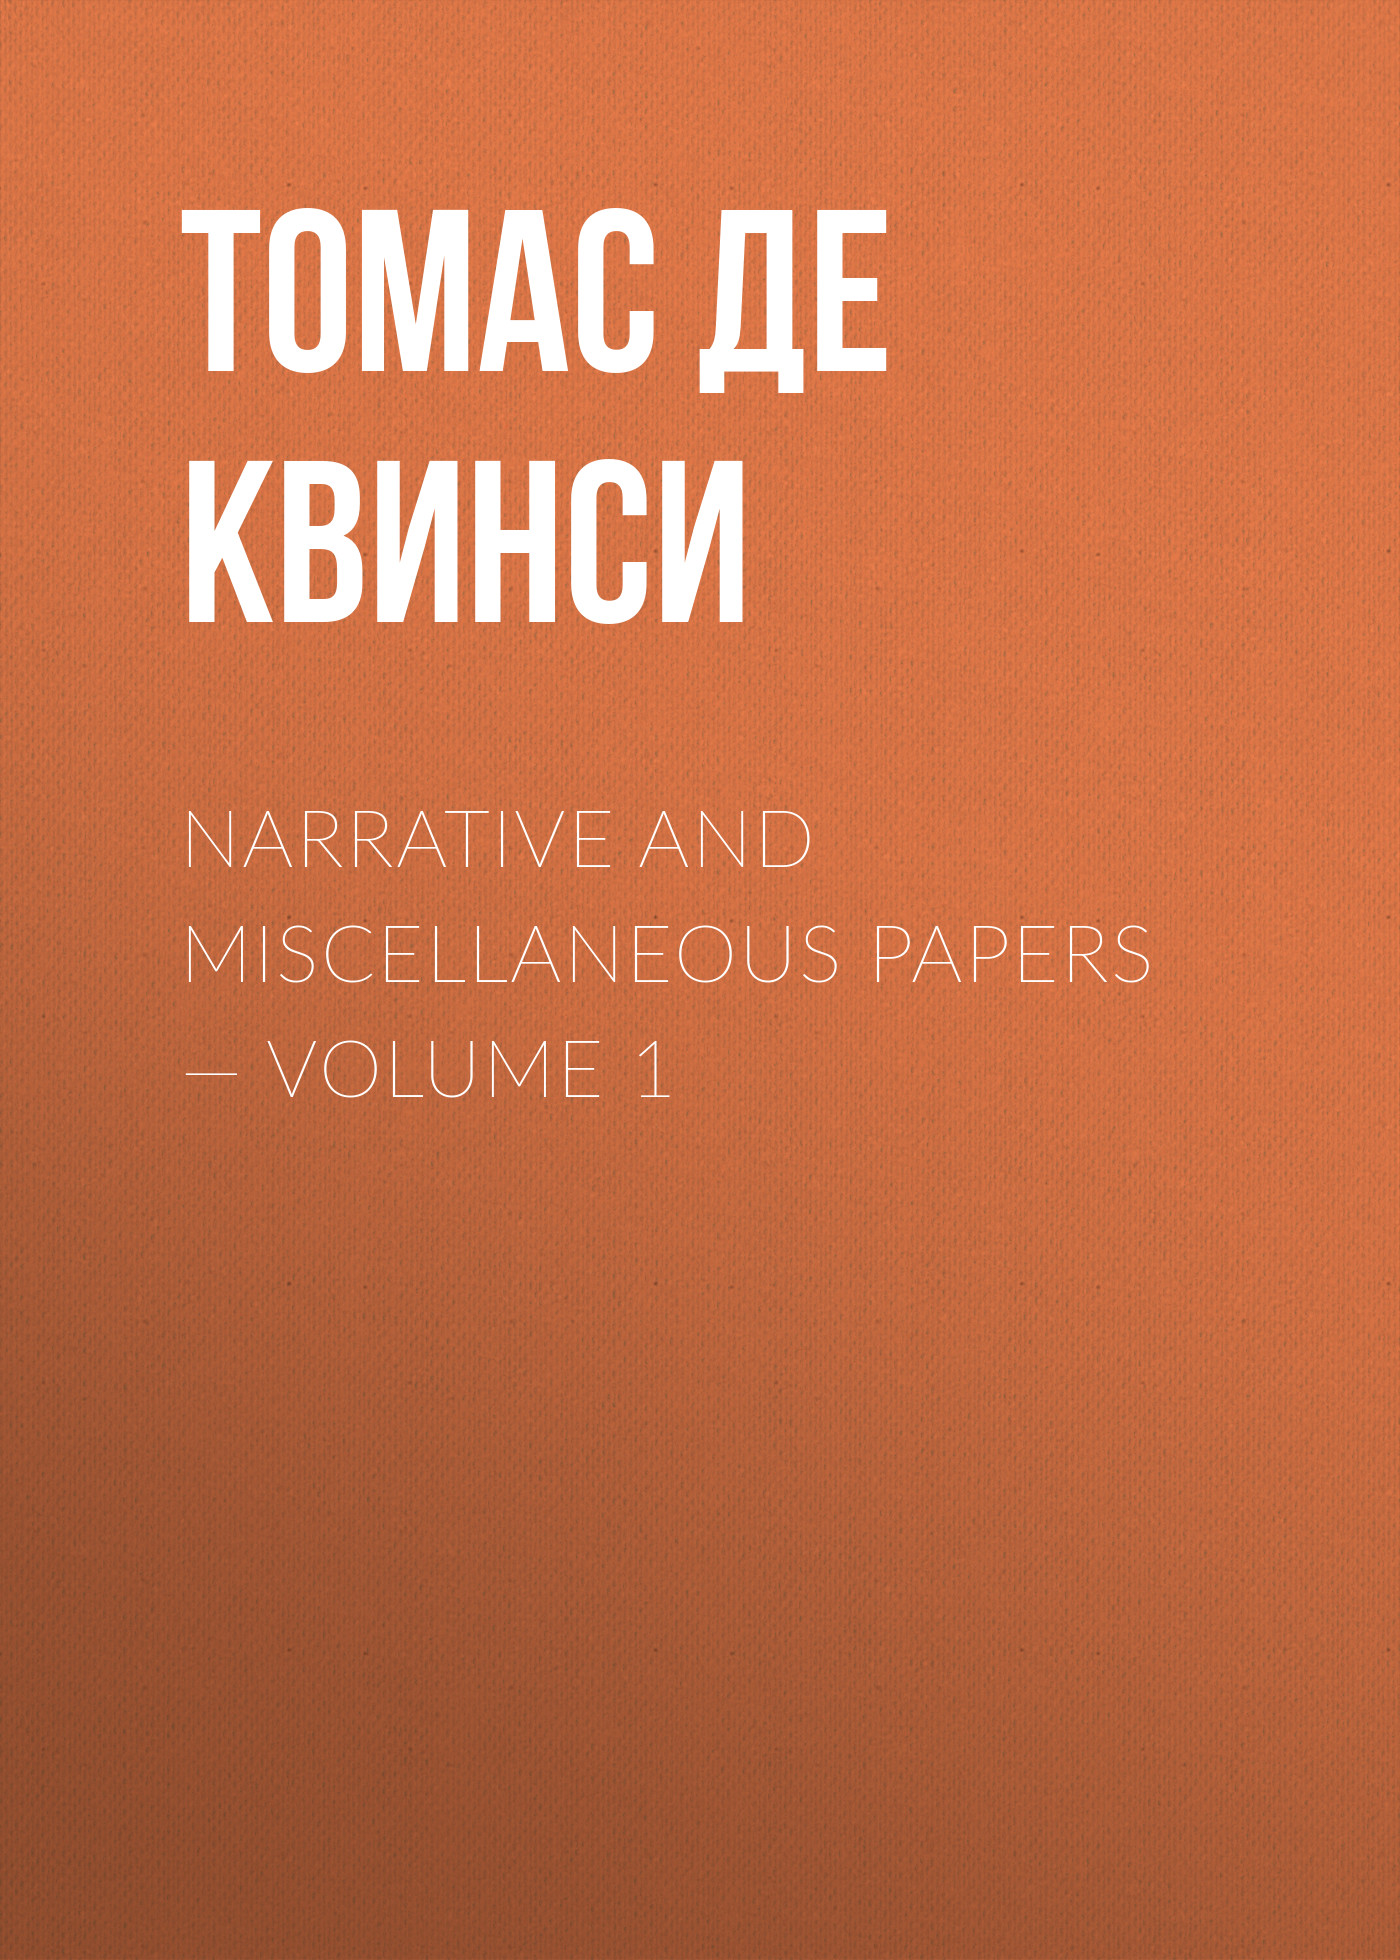 Narrative and Miscellaneous Papers— Volume 1